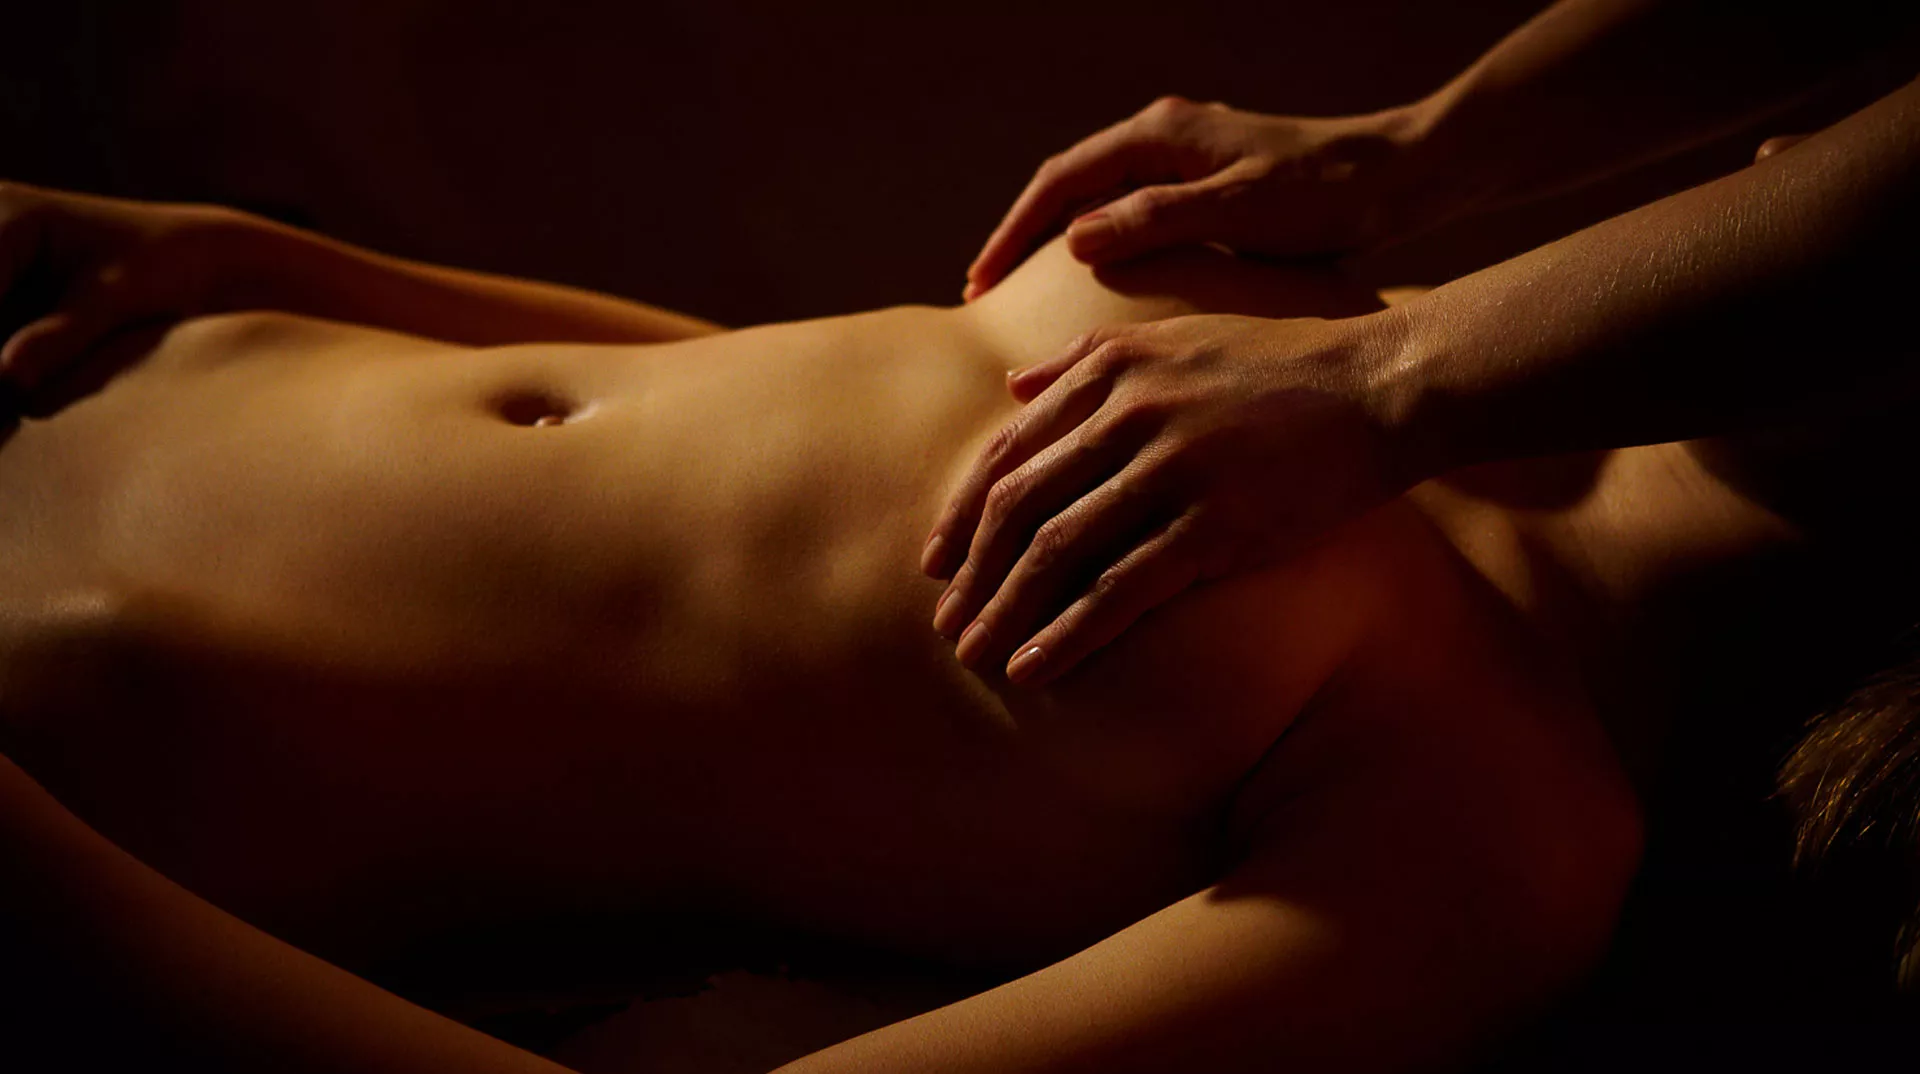 Rozina Massage And Morocco in Ethiopia, Africa | Massage Parlors,Sex-Friendly Places - Rated 0.5